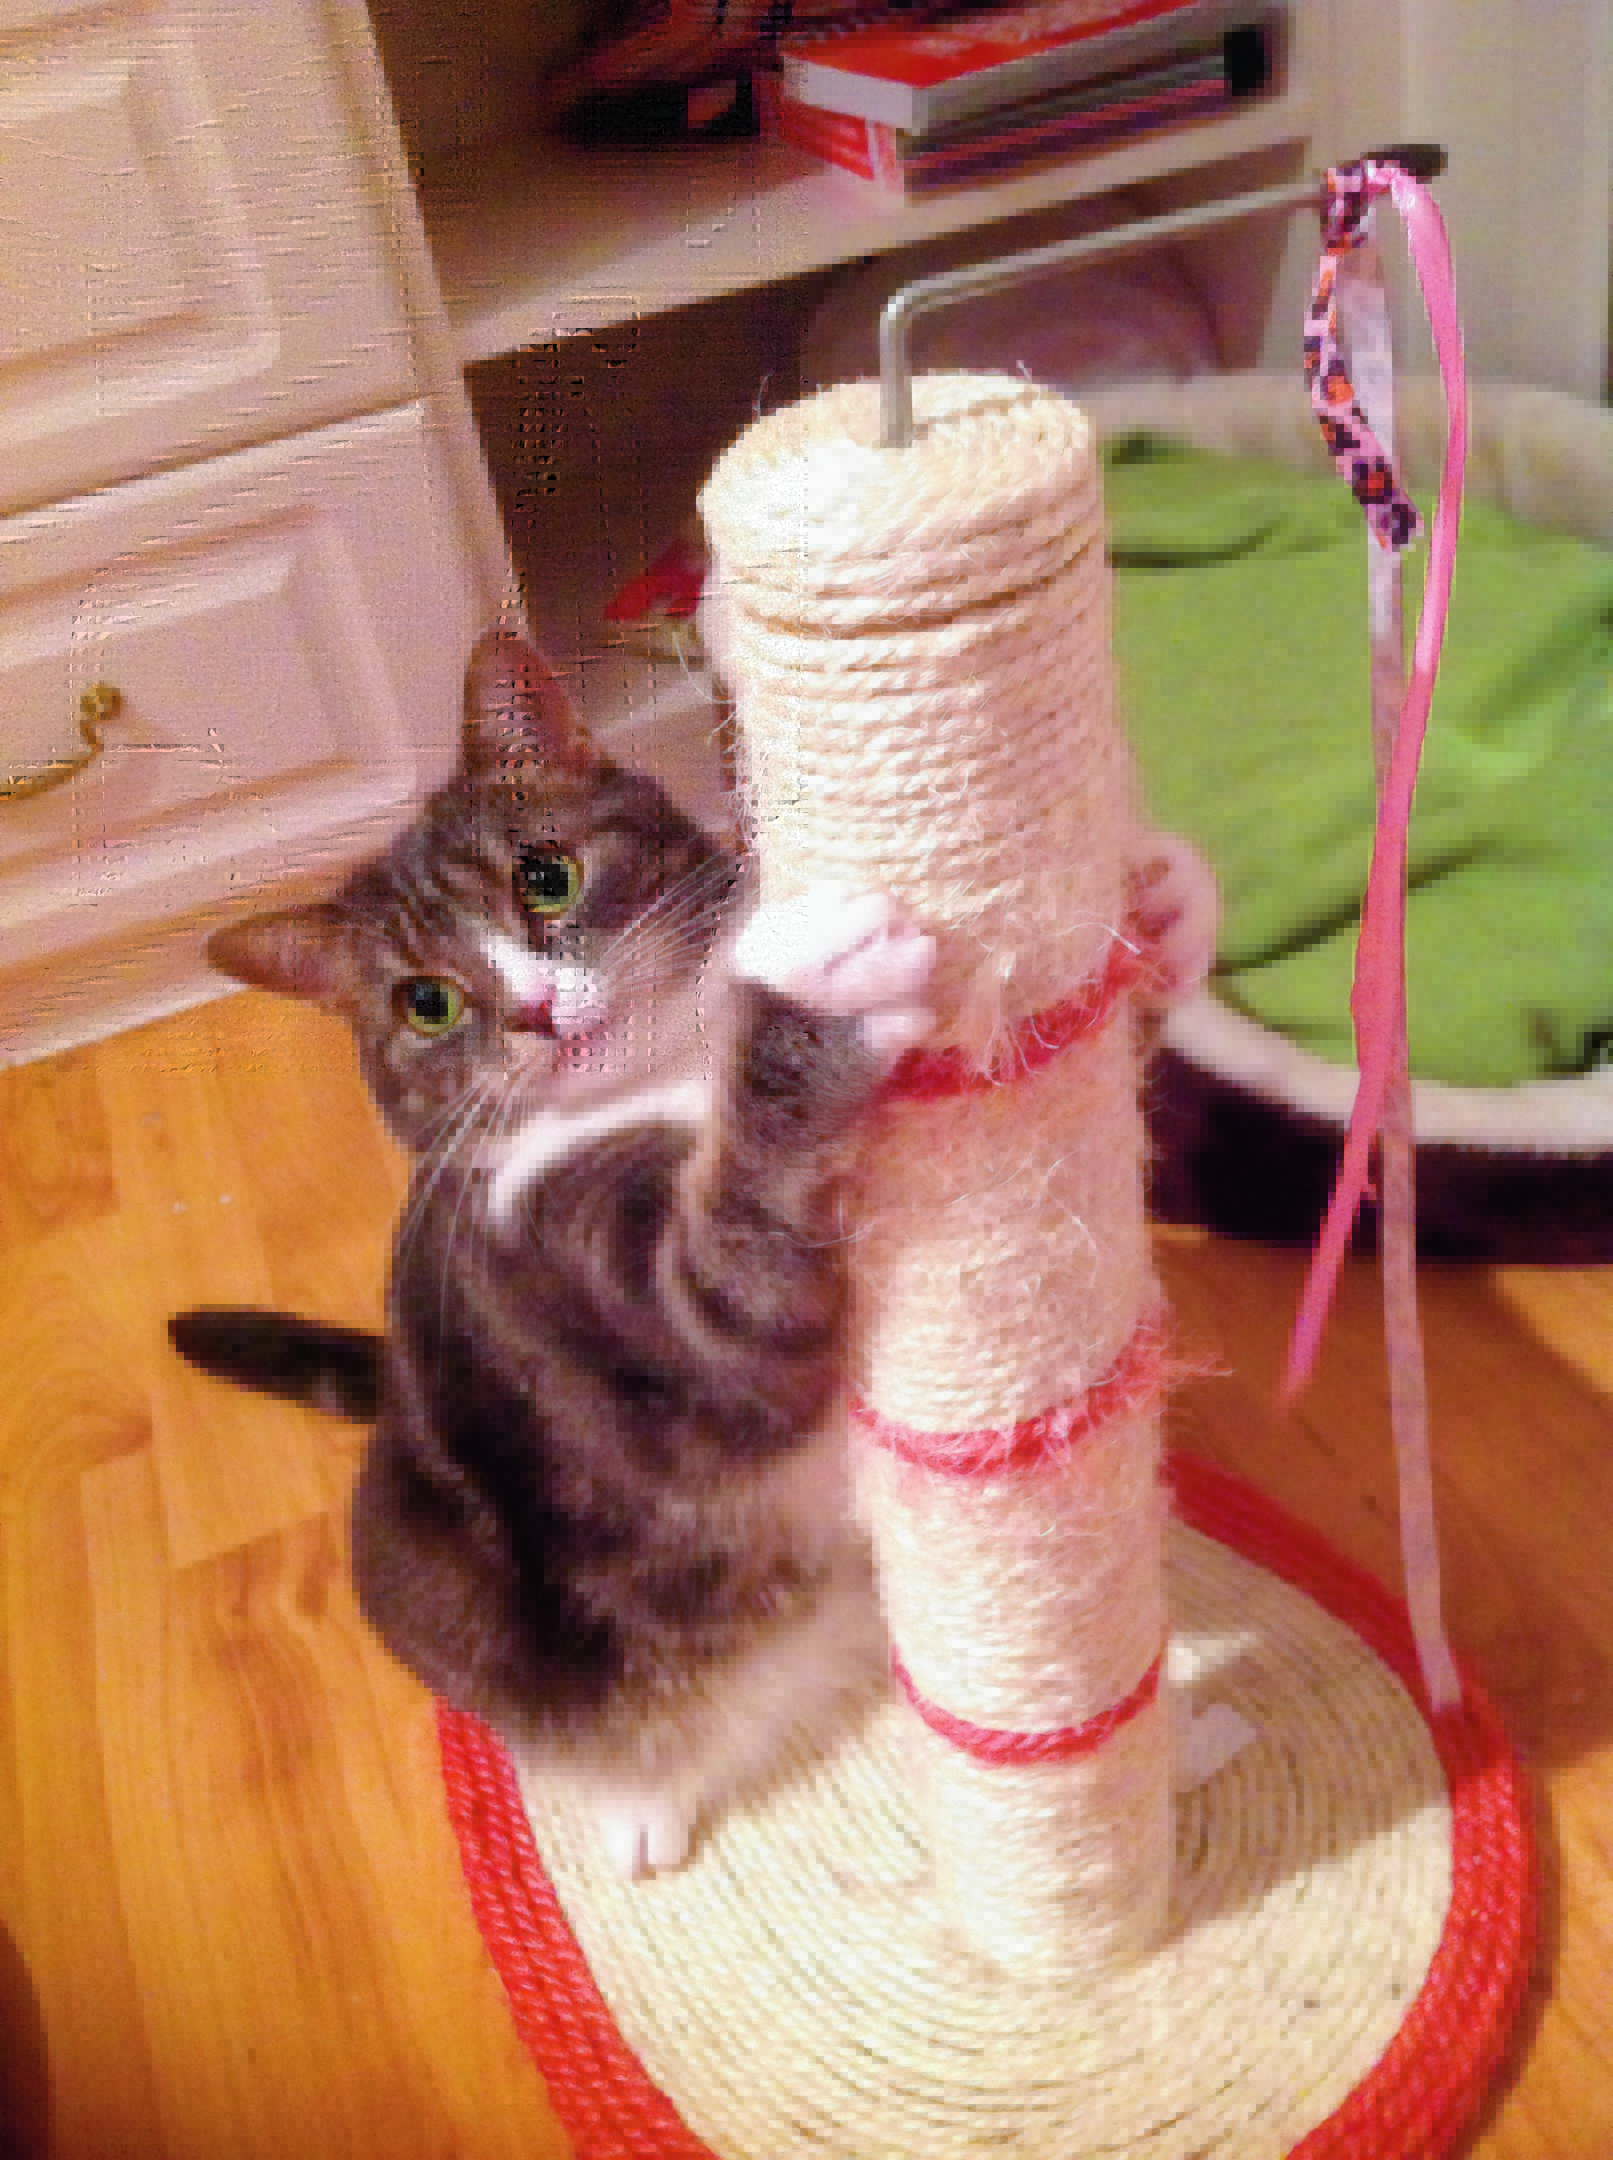 Sox is four years old and loves her scratch pole. She lives with Susan Casey in Kincorth, Aberdeen